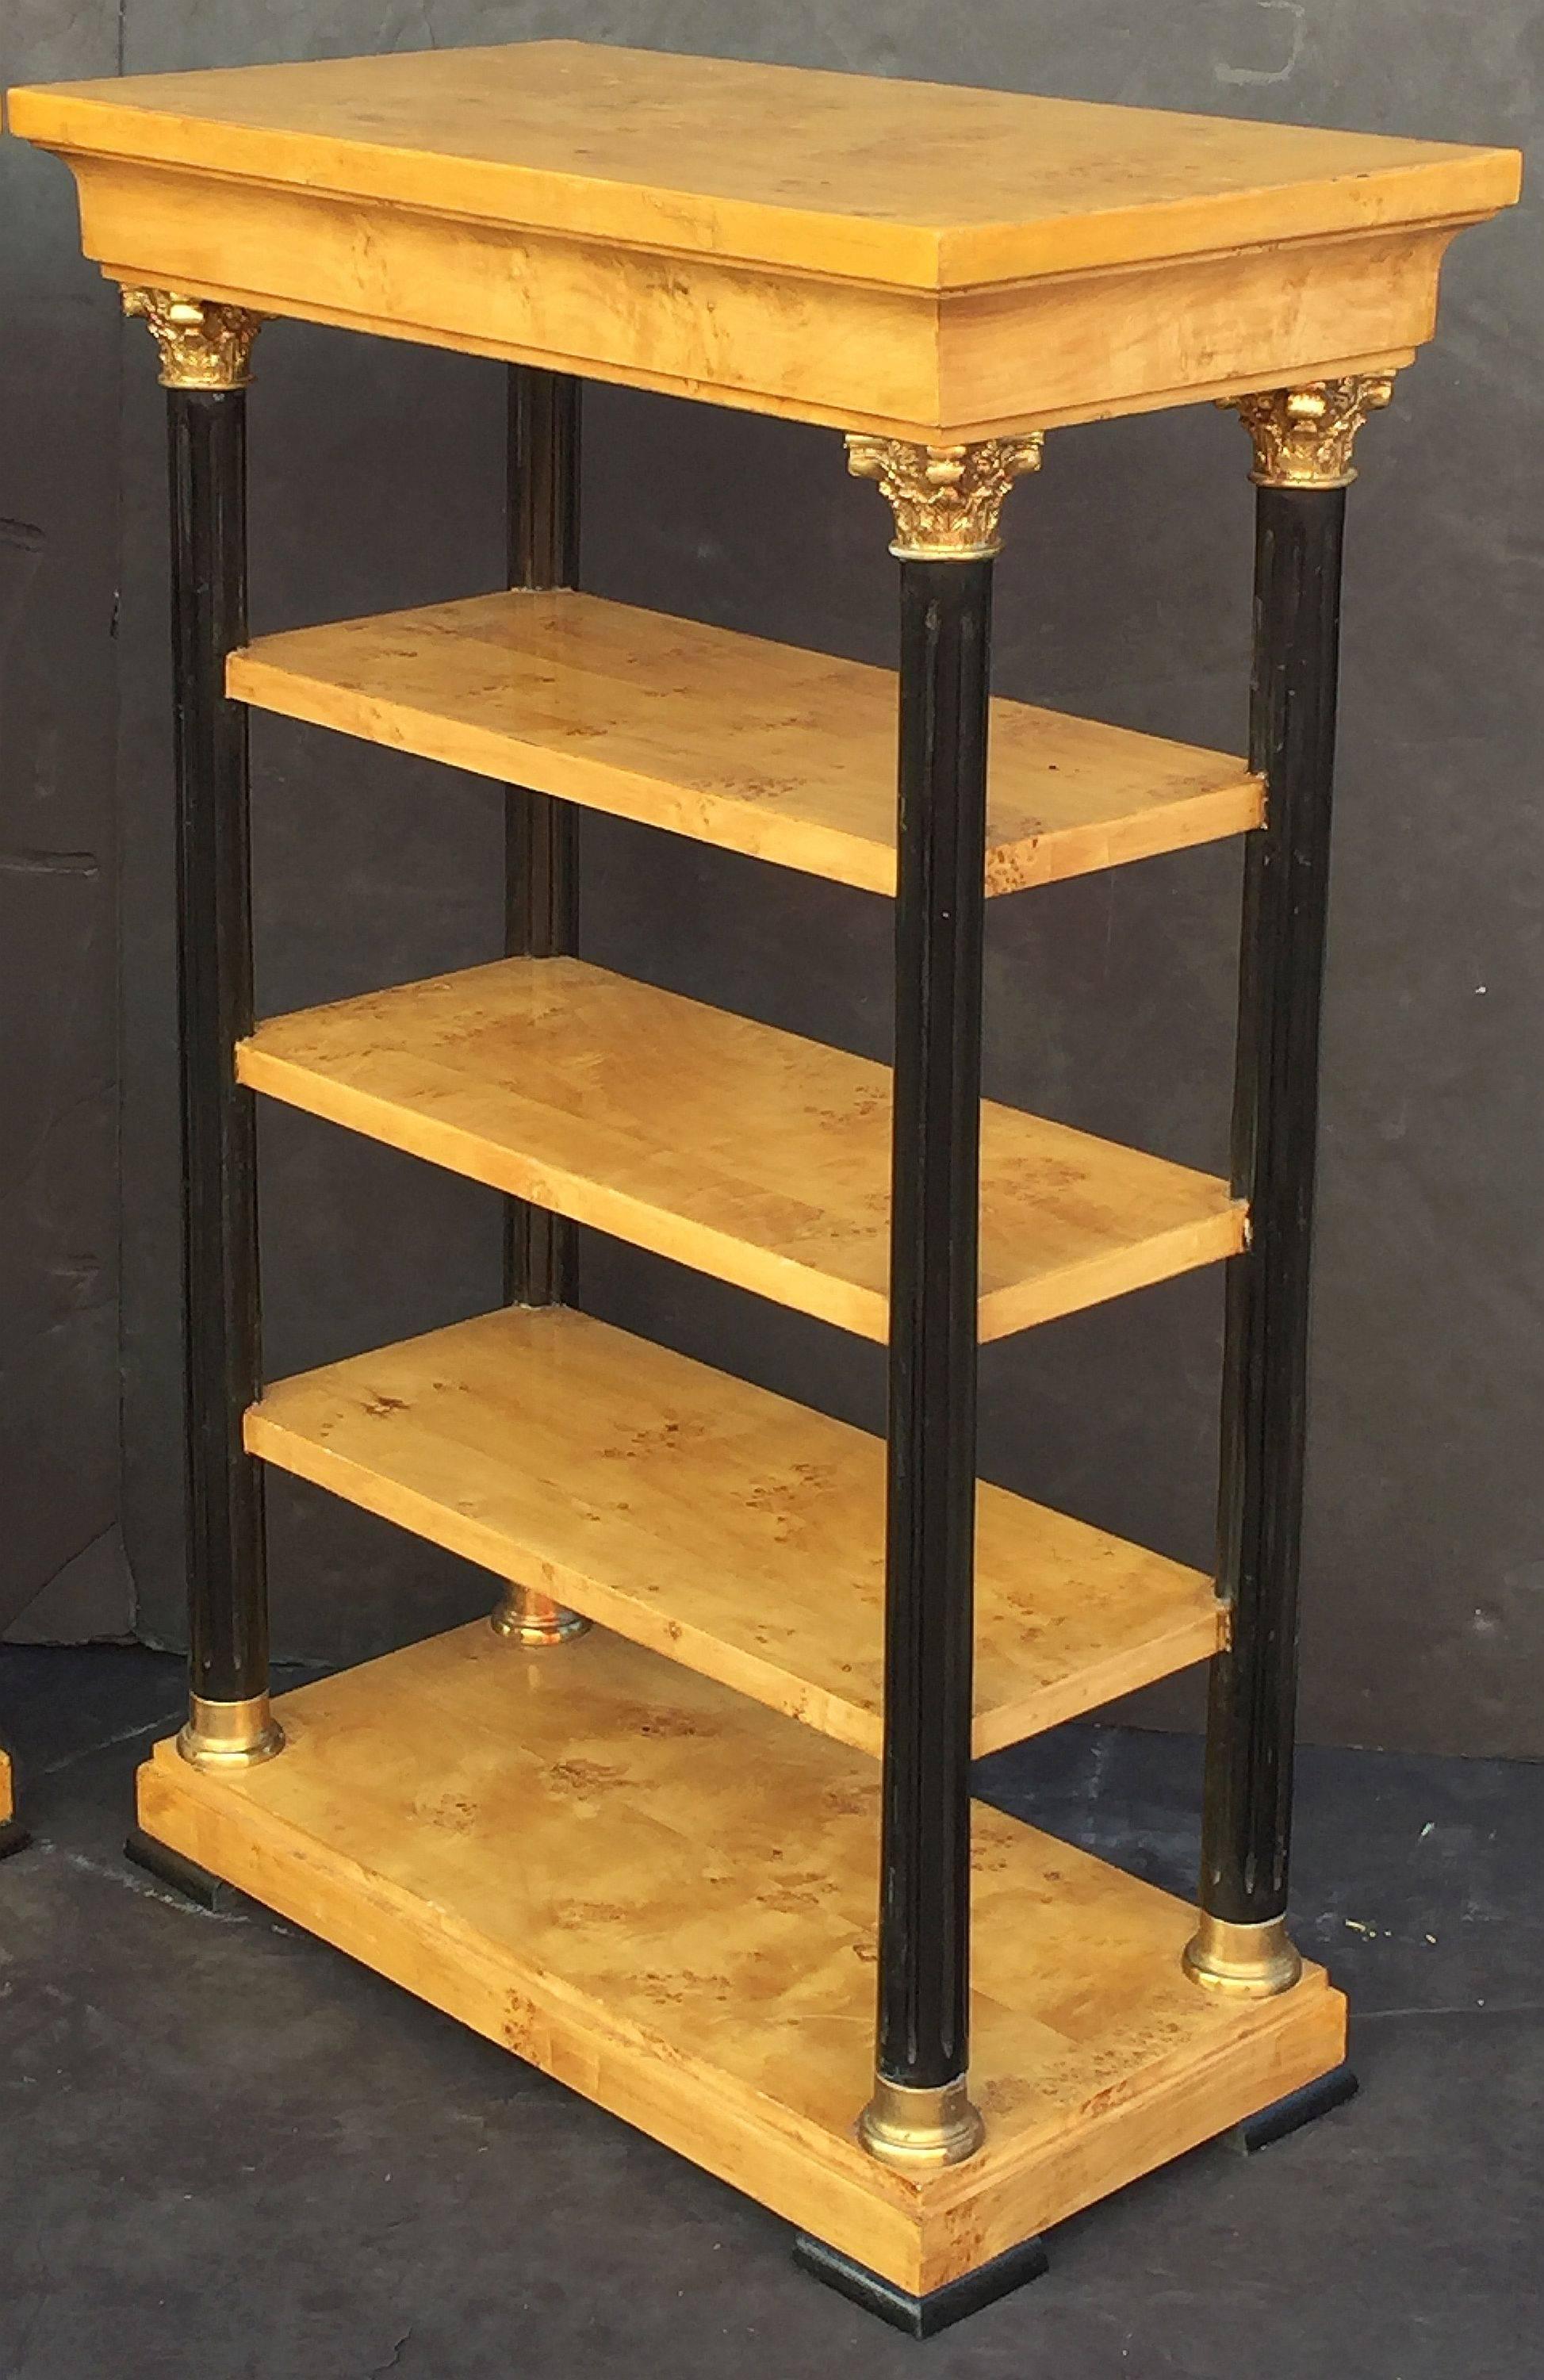 A fine pair of English open bookcases (or shelves) in the Biedermeier style, each shelving unit featuring a moulded top frieze of figured maple over four fluted column posts of ebonized wood, each post capped at top and bottom with gilt metal